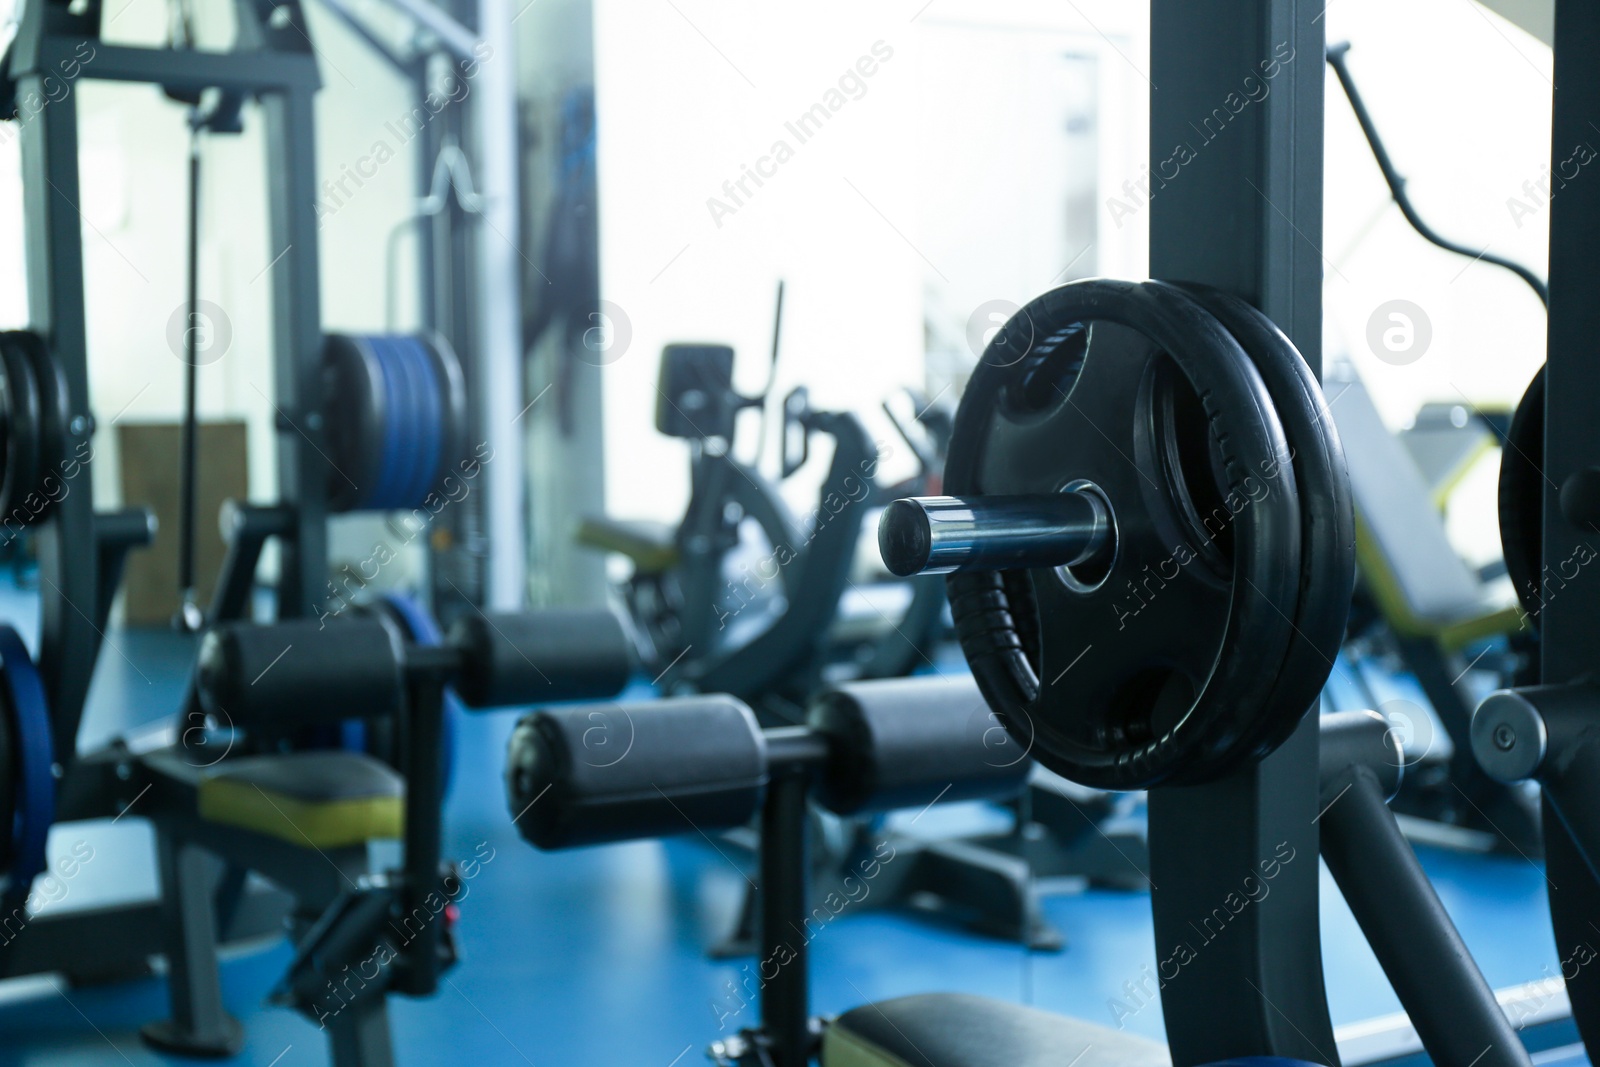 Photo of Plates on machine in modern gym with new equipment